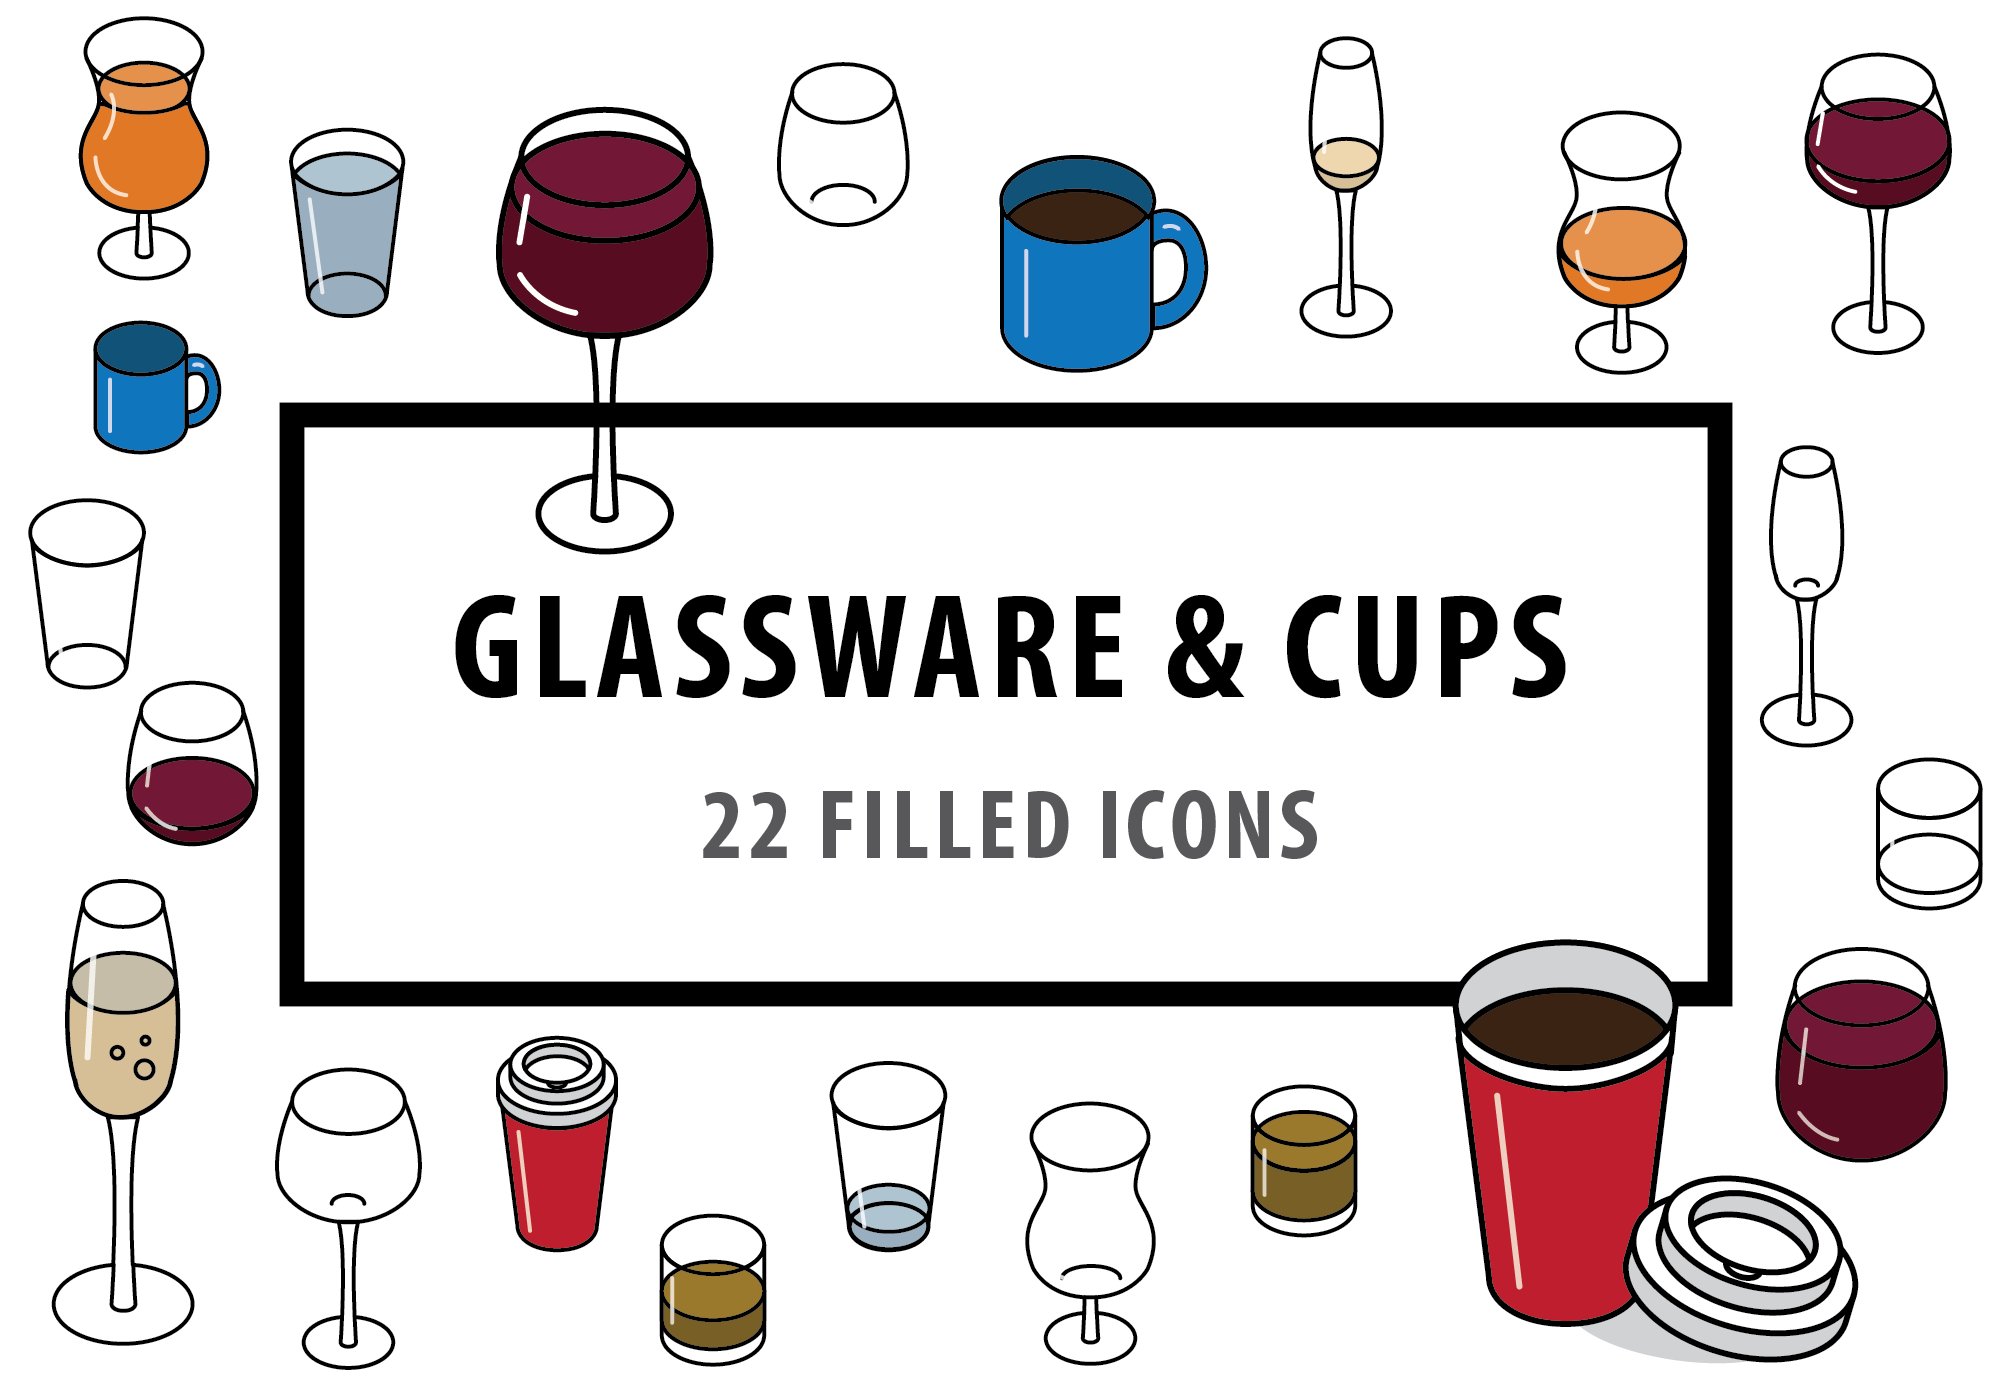 Glassware & Cups – 22 Filled Icons cover image.